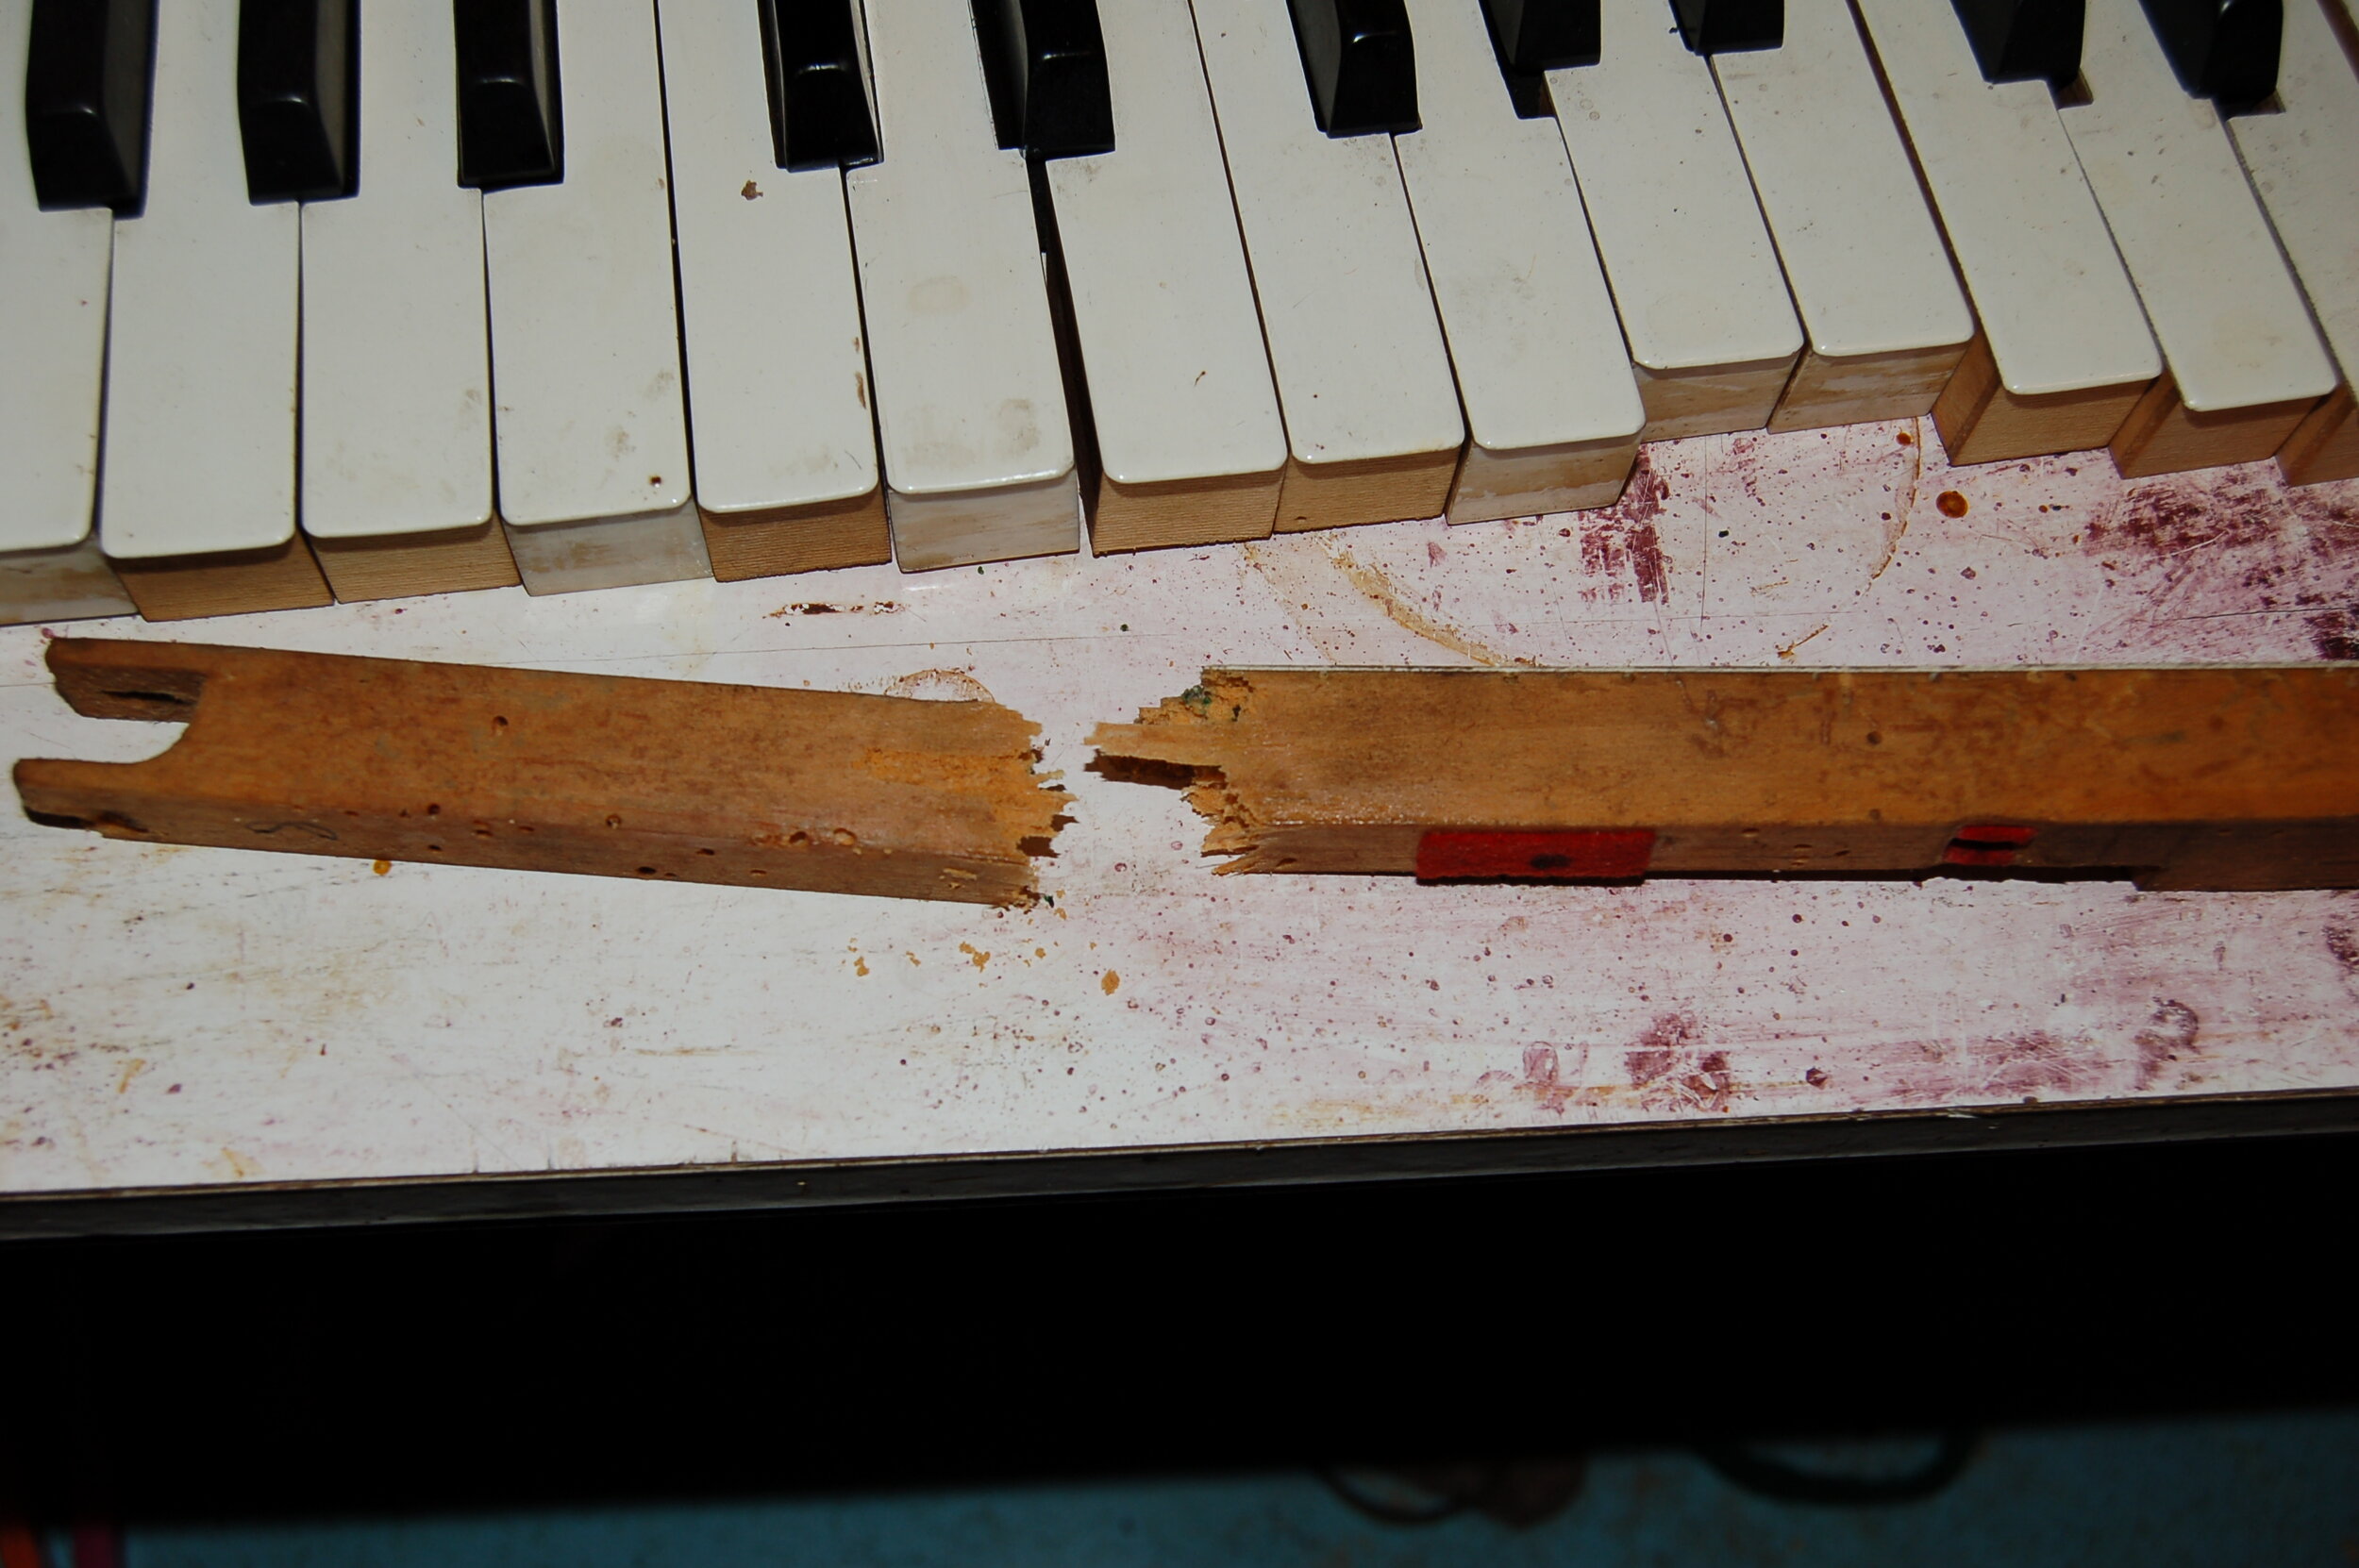  3-4 keys were so far worm eaten that even with wood hardener applied it was not salvageable  